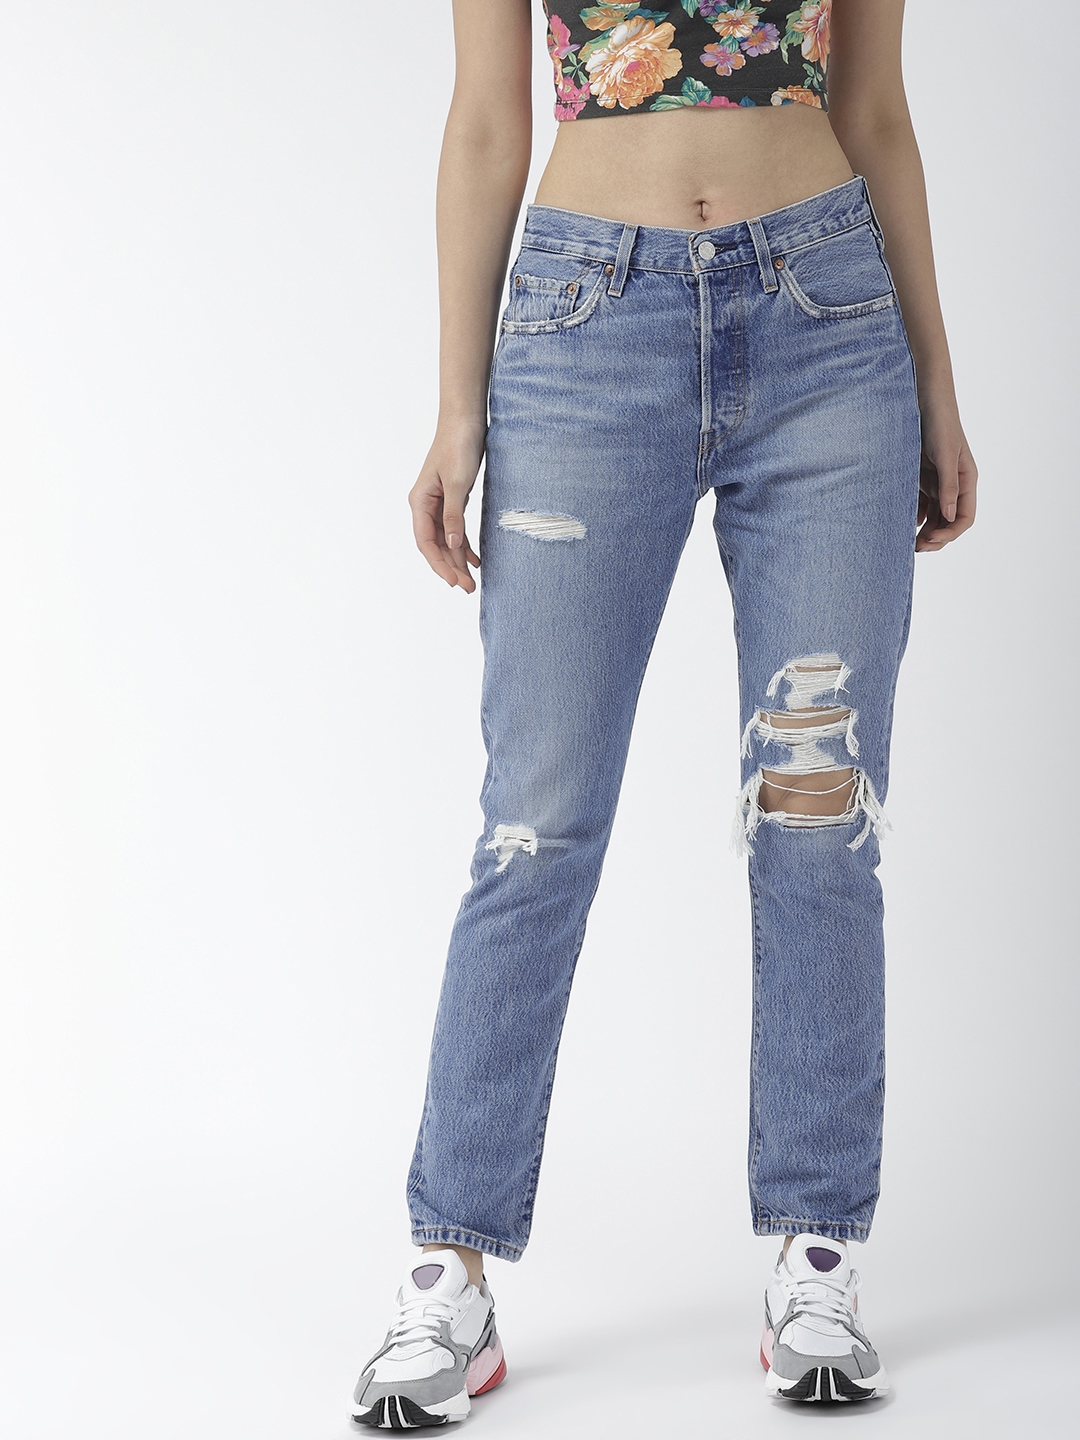 Buy Levis Jeans Womens online | Lazada.com.ph-sonthuy.vn